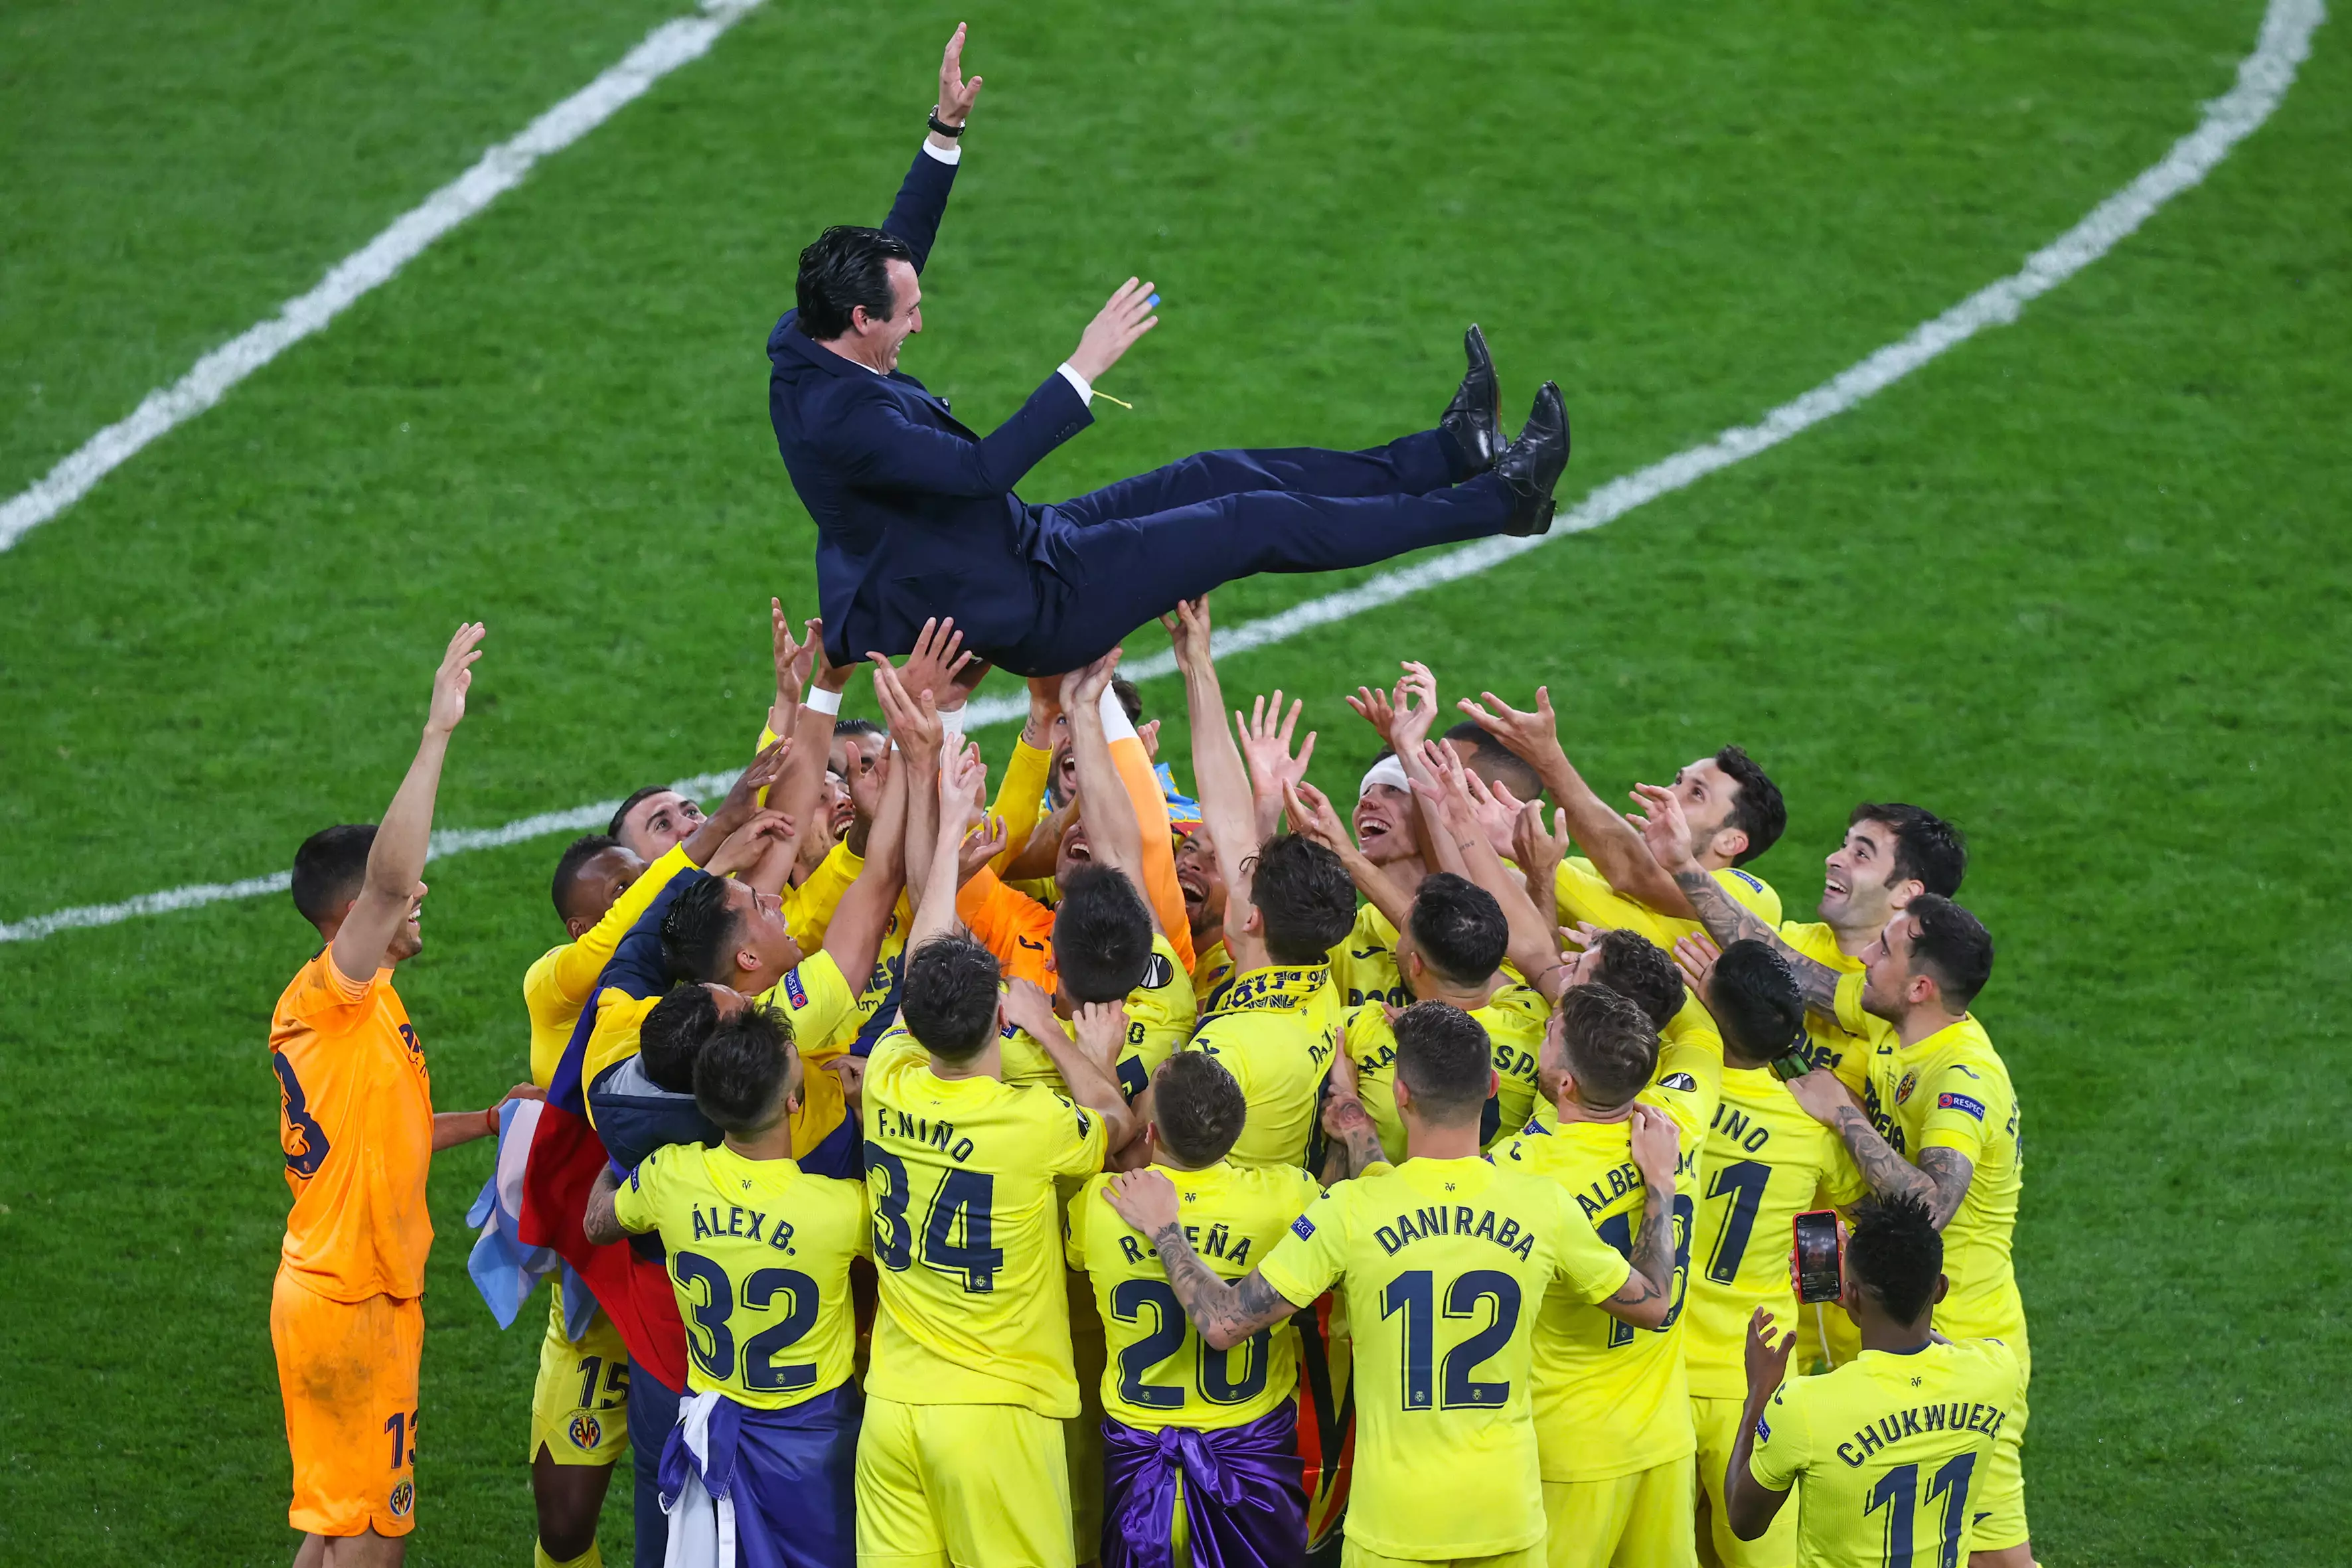 PA: Villarreal celebrate after beating Manchester United in the Europa League Final.